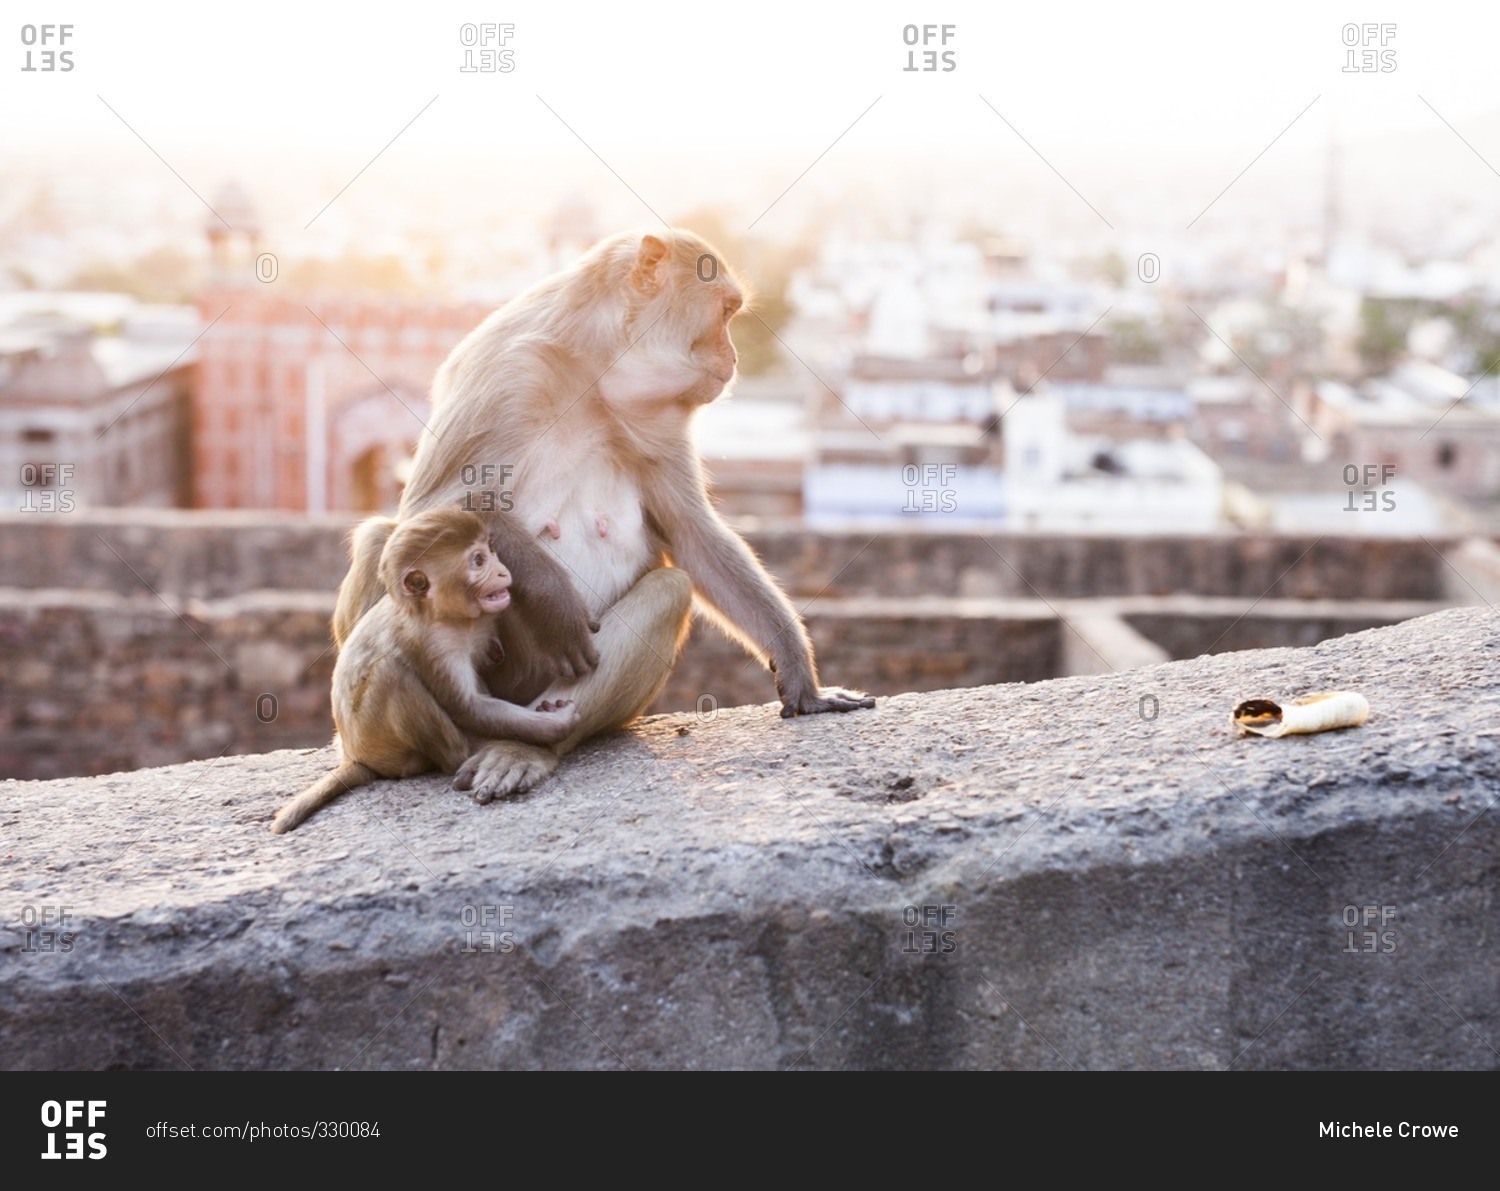 The Monkey Temple in Jaipur, India